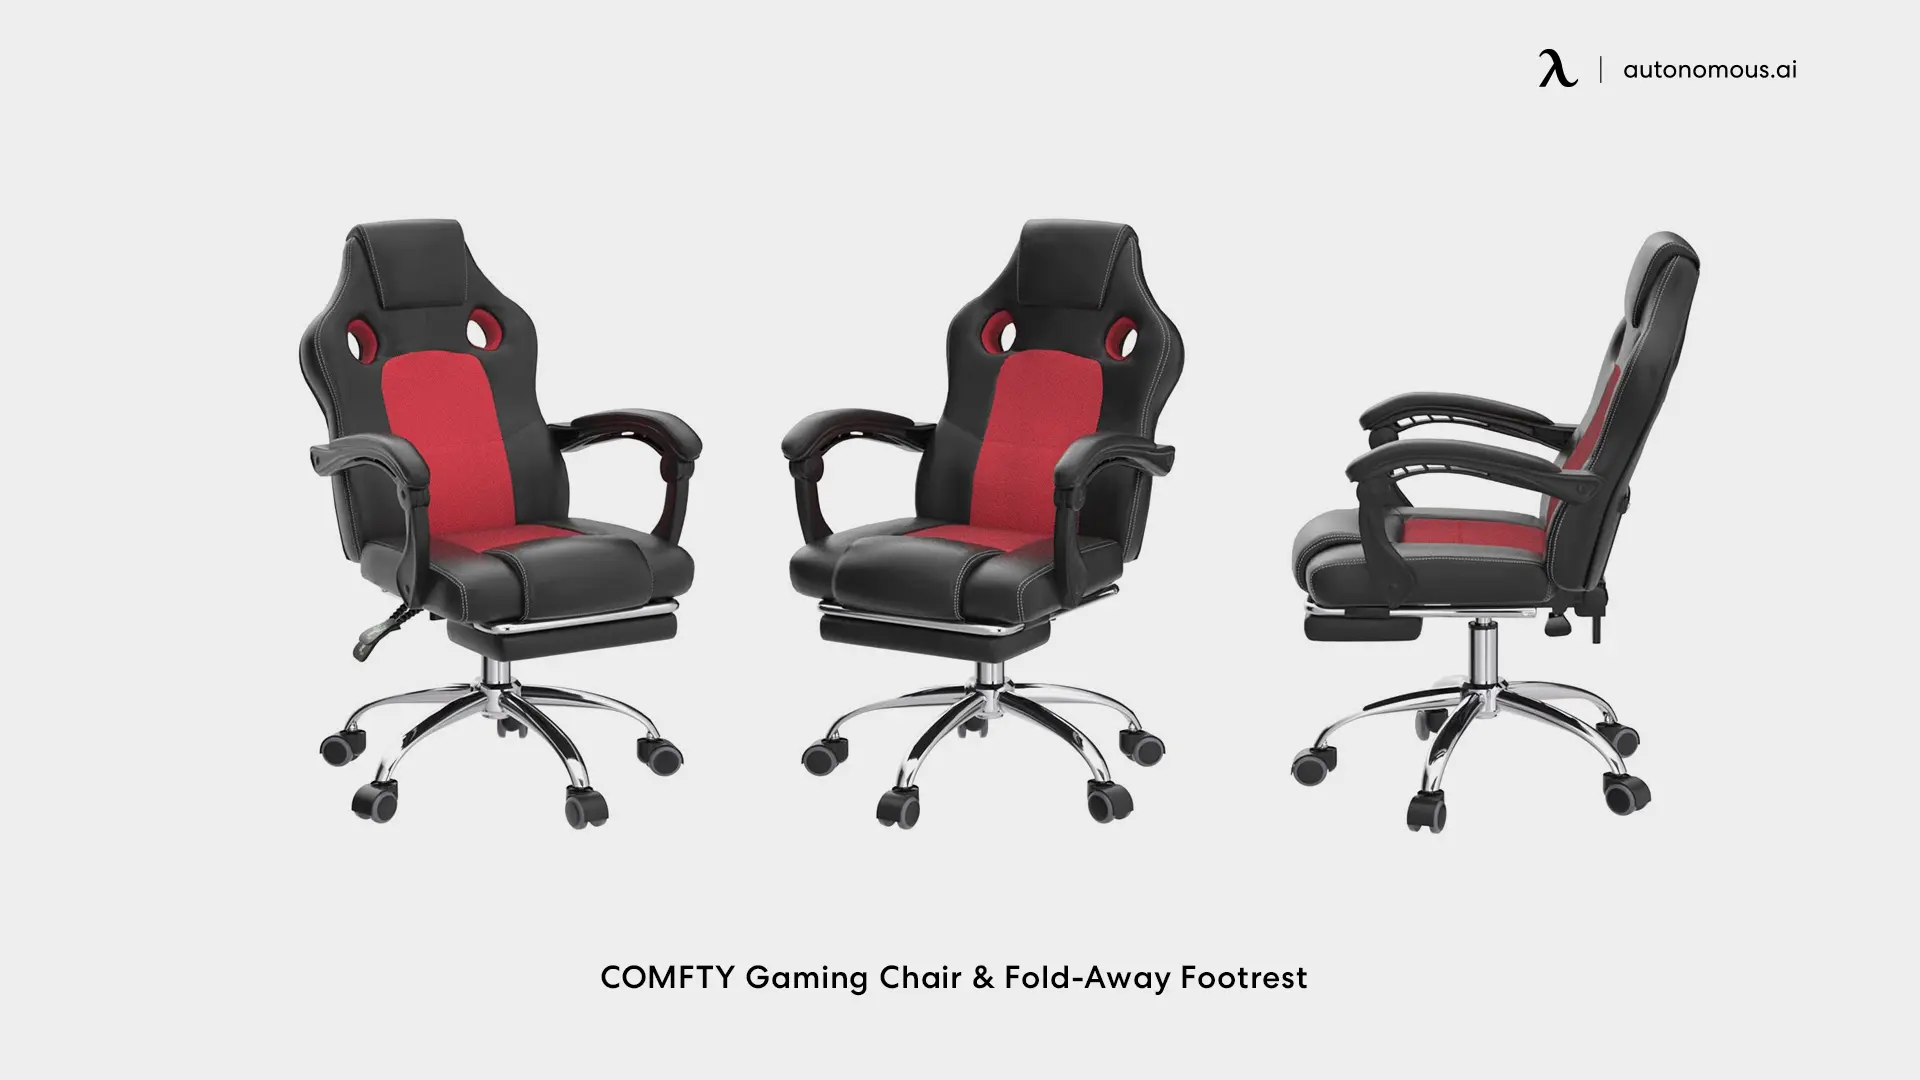 COMFTY Gaming Chair and Fold-Away Footrest